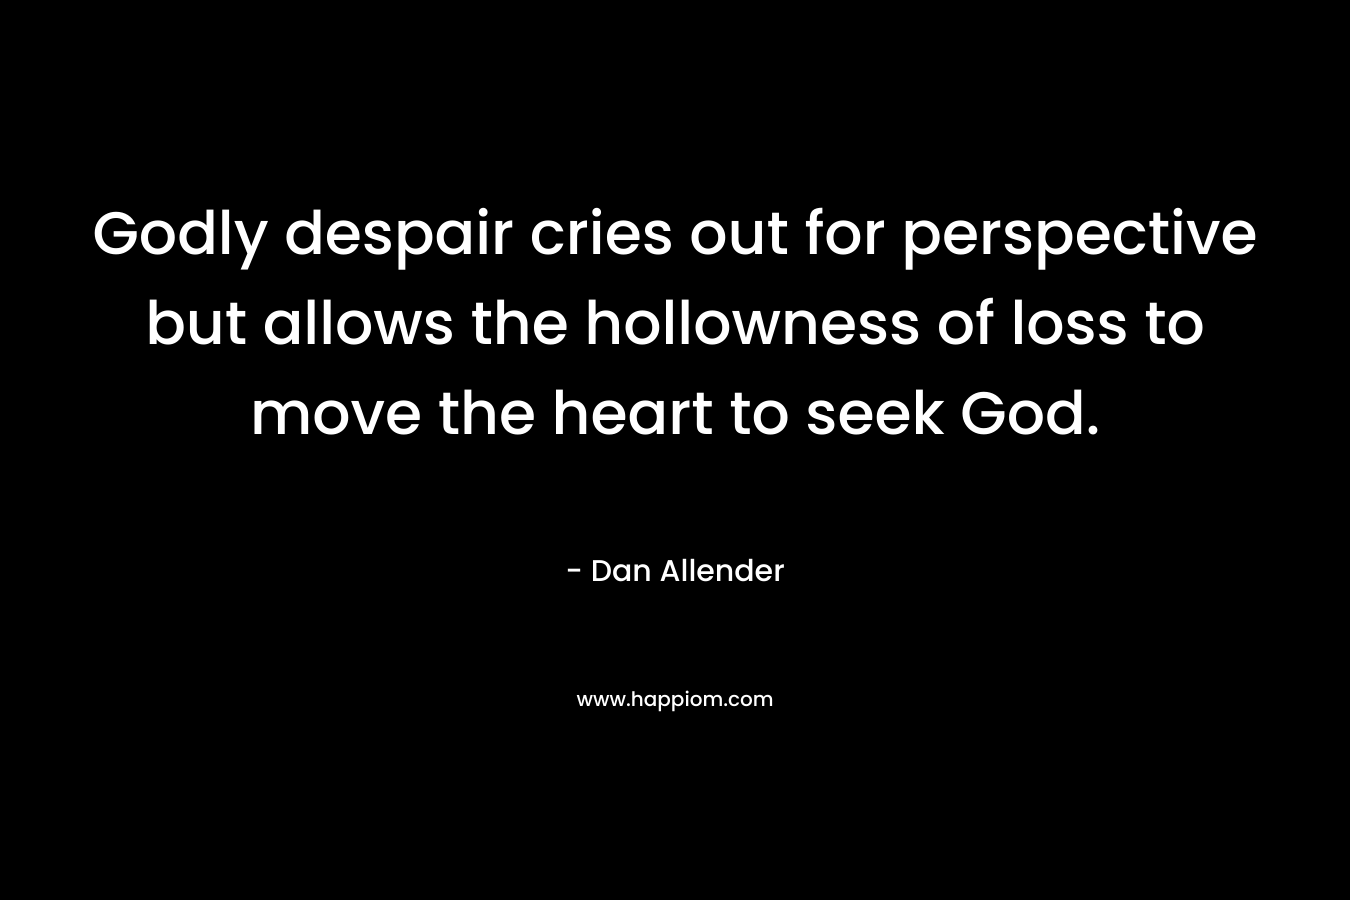 Godly despair cries out for perspective but allows the hollowness of loss to move the heart to seek God. – Dan Allender